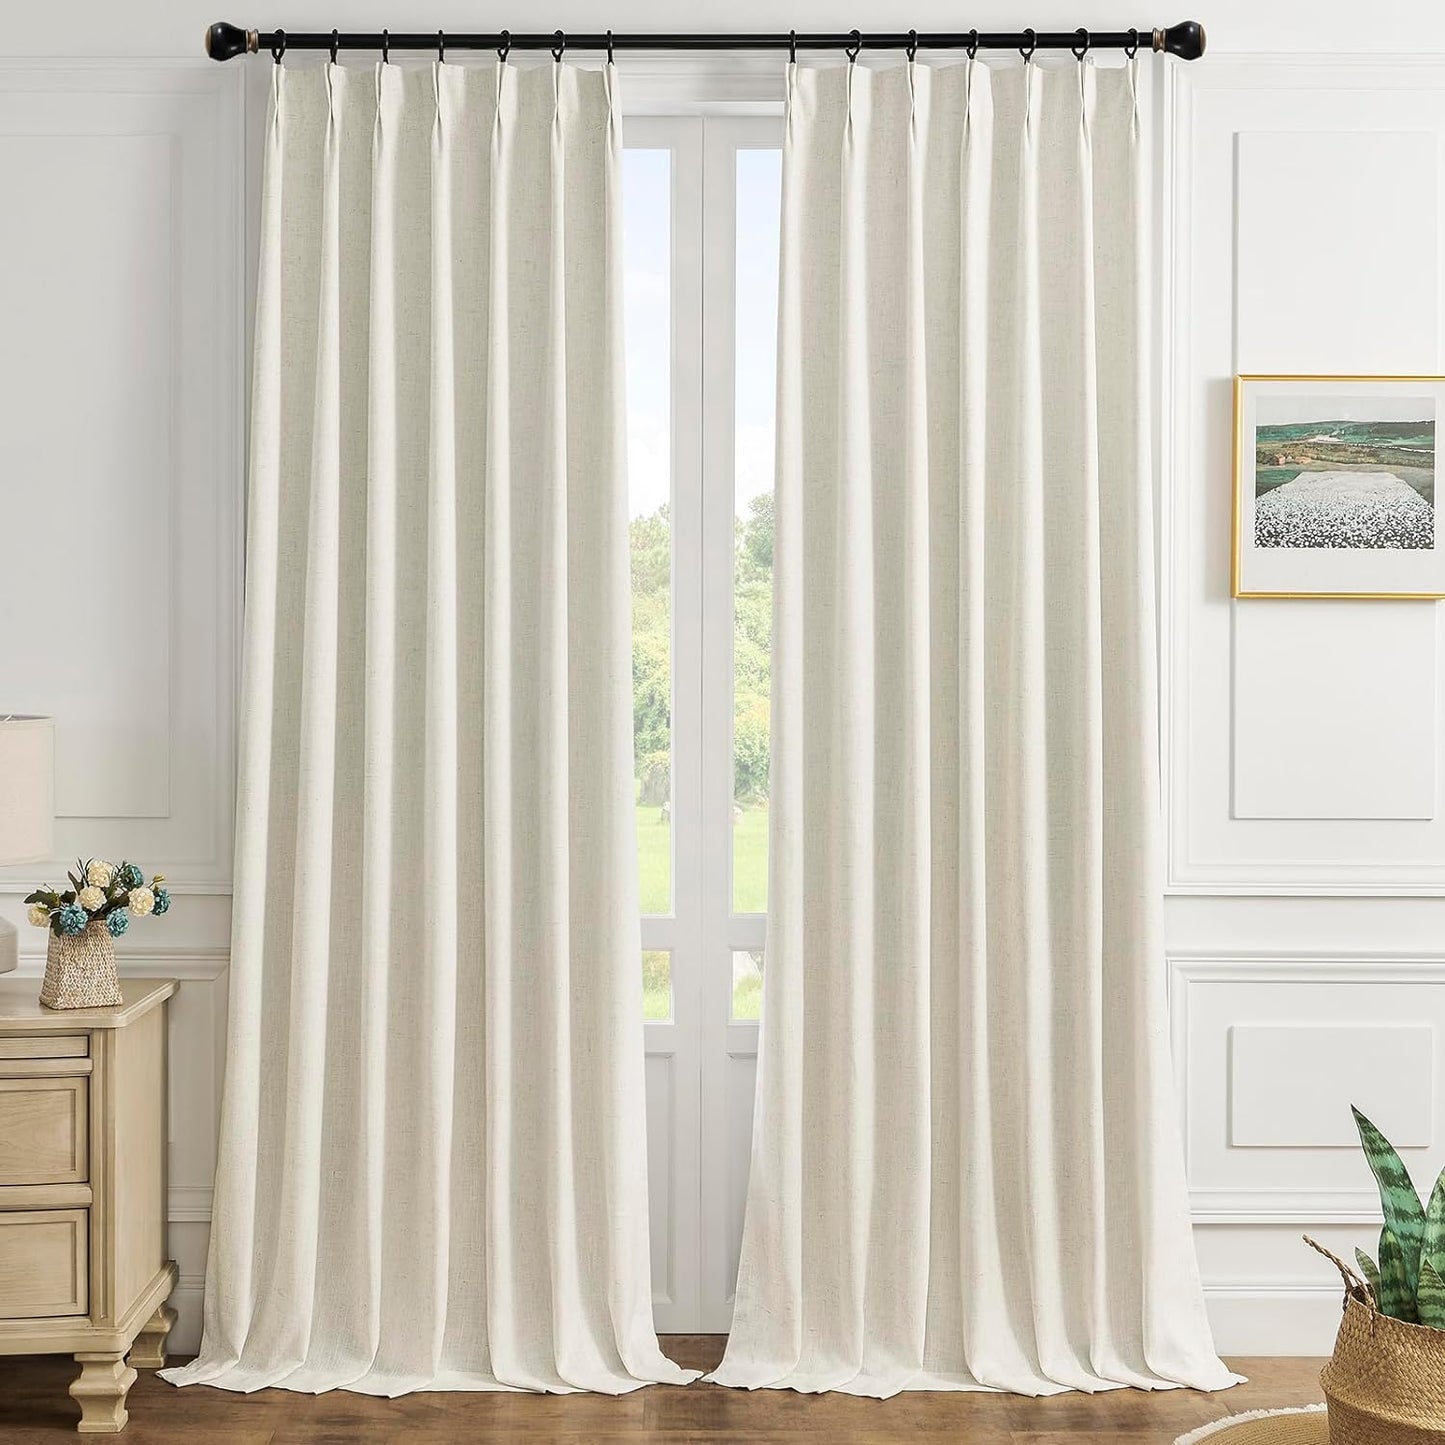 Maison Colette Pinch Pleat Natural Linen Sheer Curtain 95 Inches Long,Back Tab Stripe Transparent Voile Window Drapes for Bedroom/Living Room, 2 Panels,42" Width,Linen  Maison Colette Home Linen 40"W X 108"L With Liner 